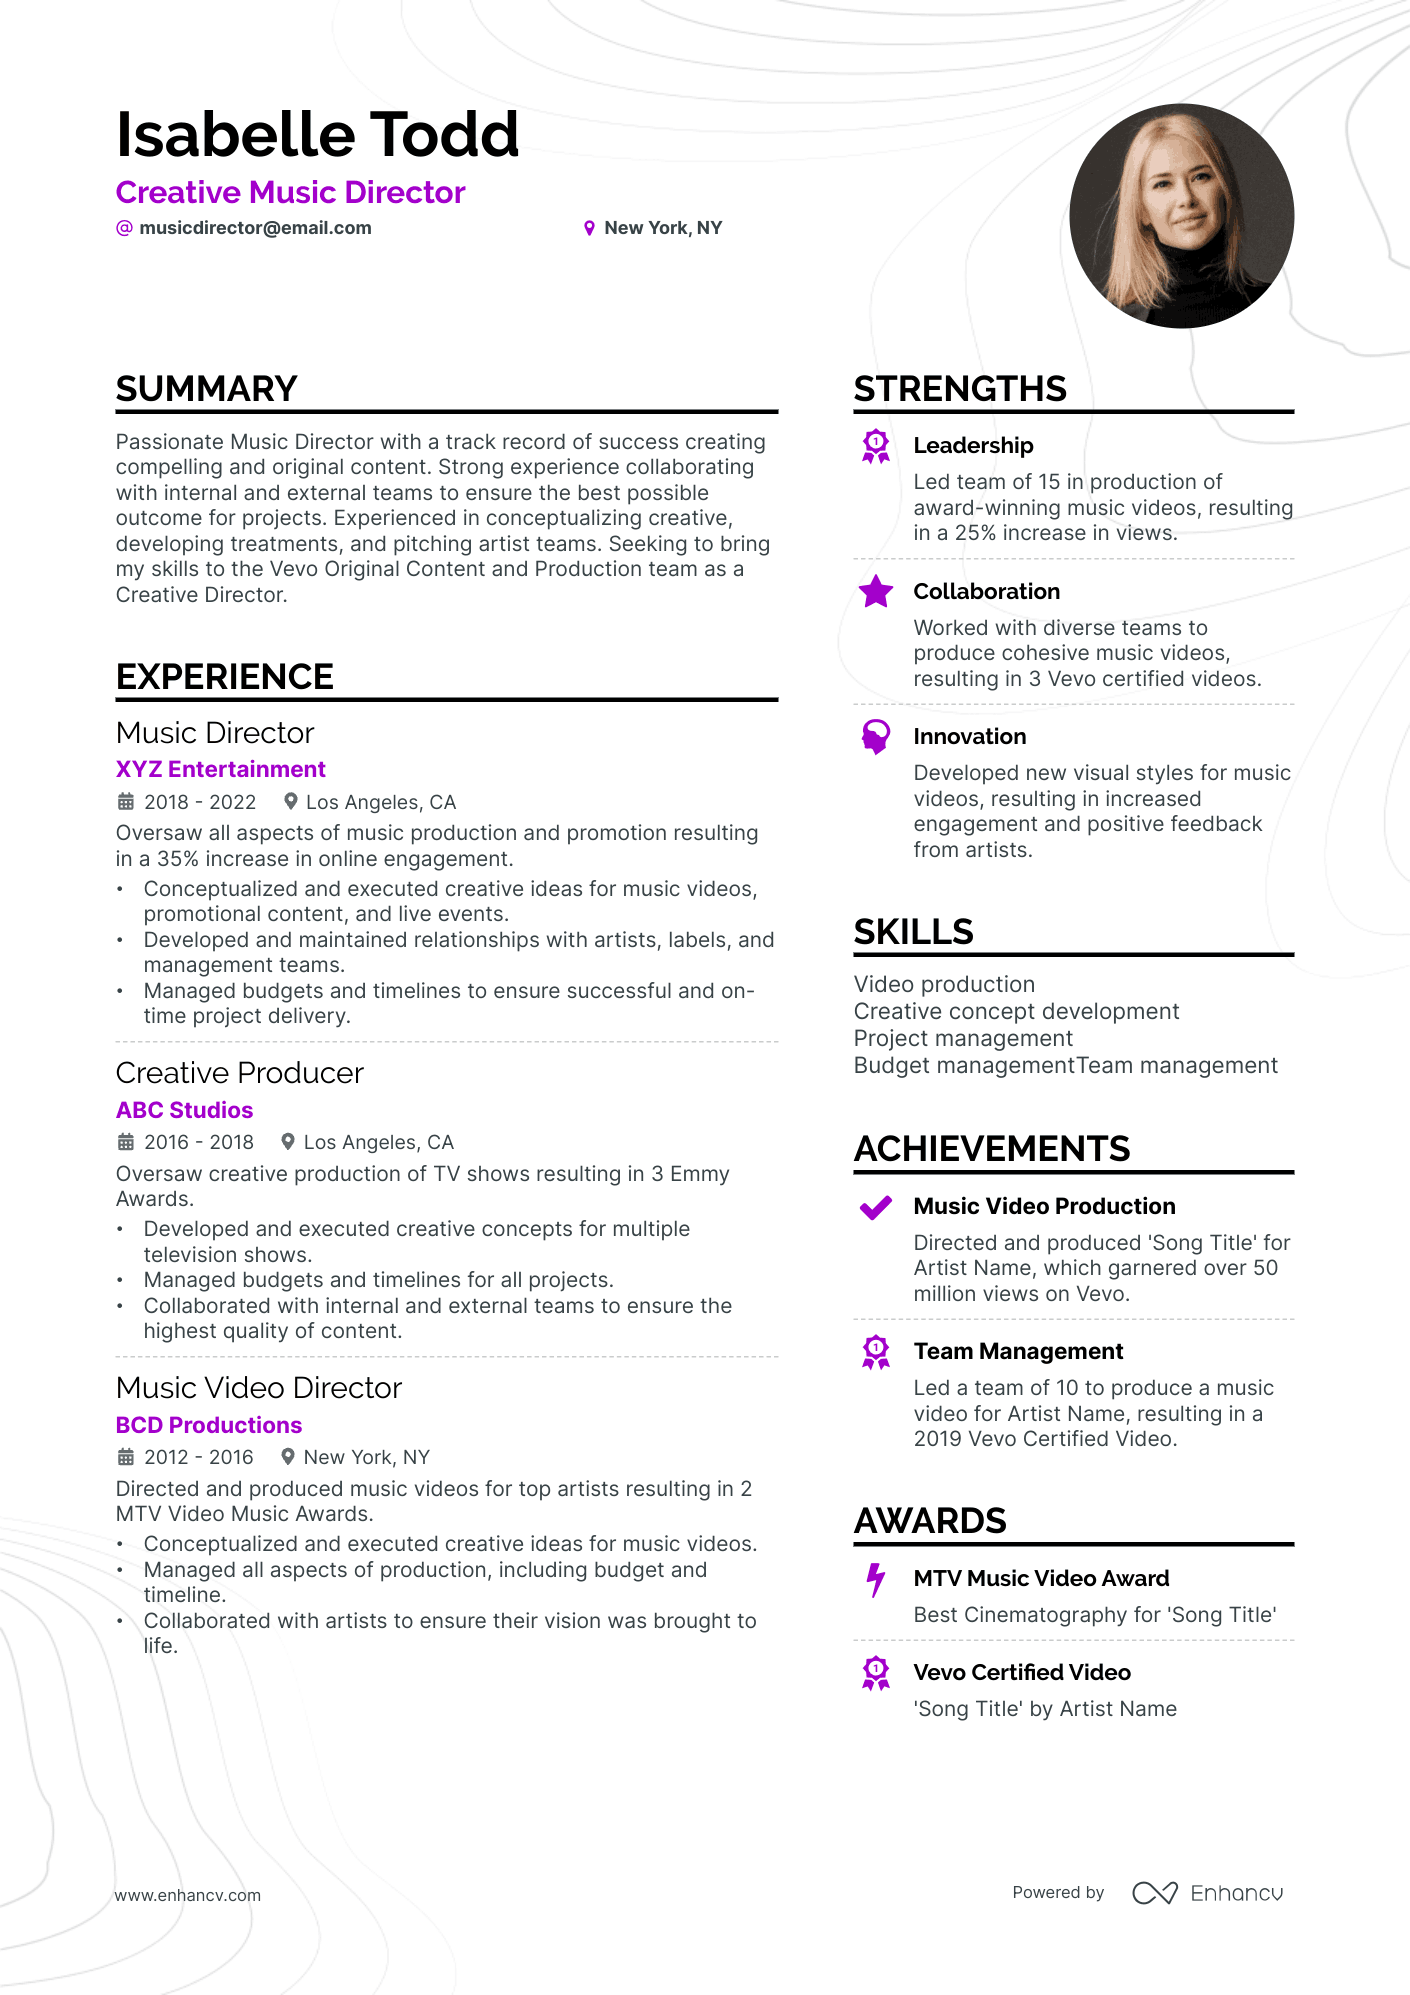 Music Director resume example